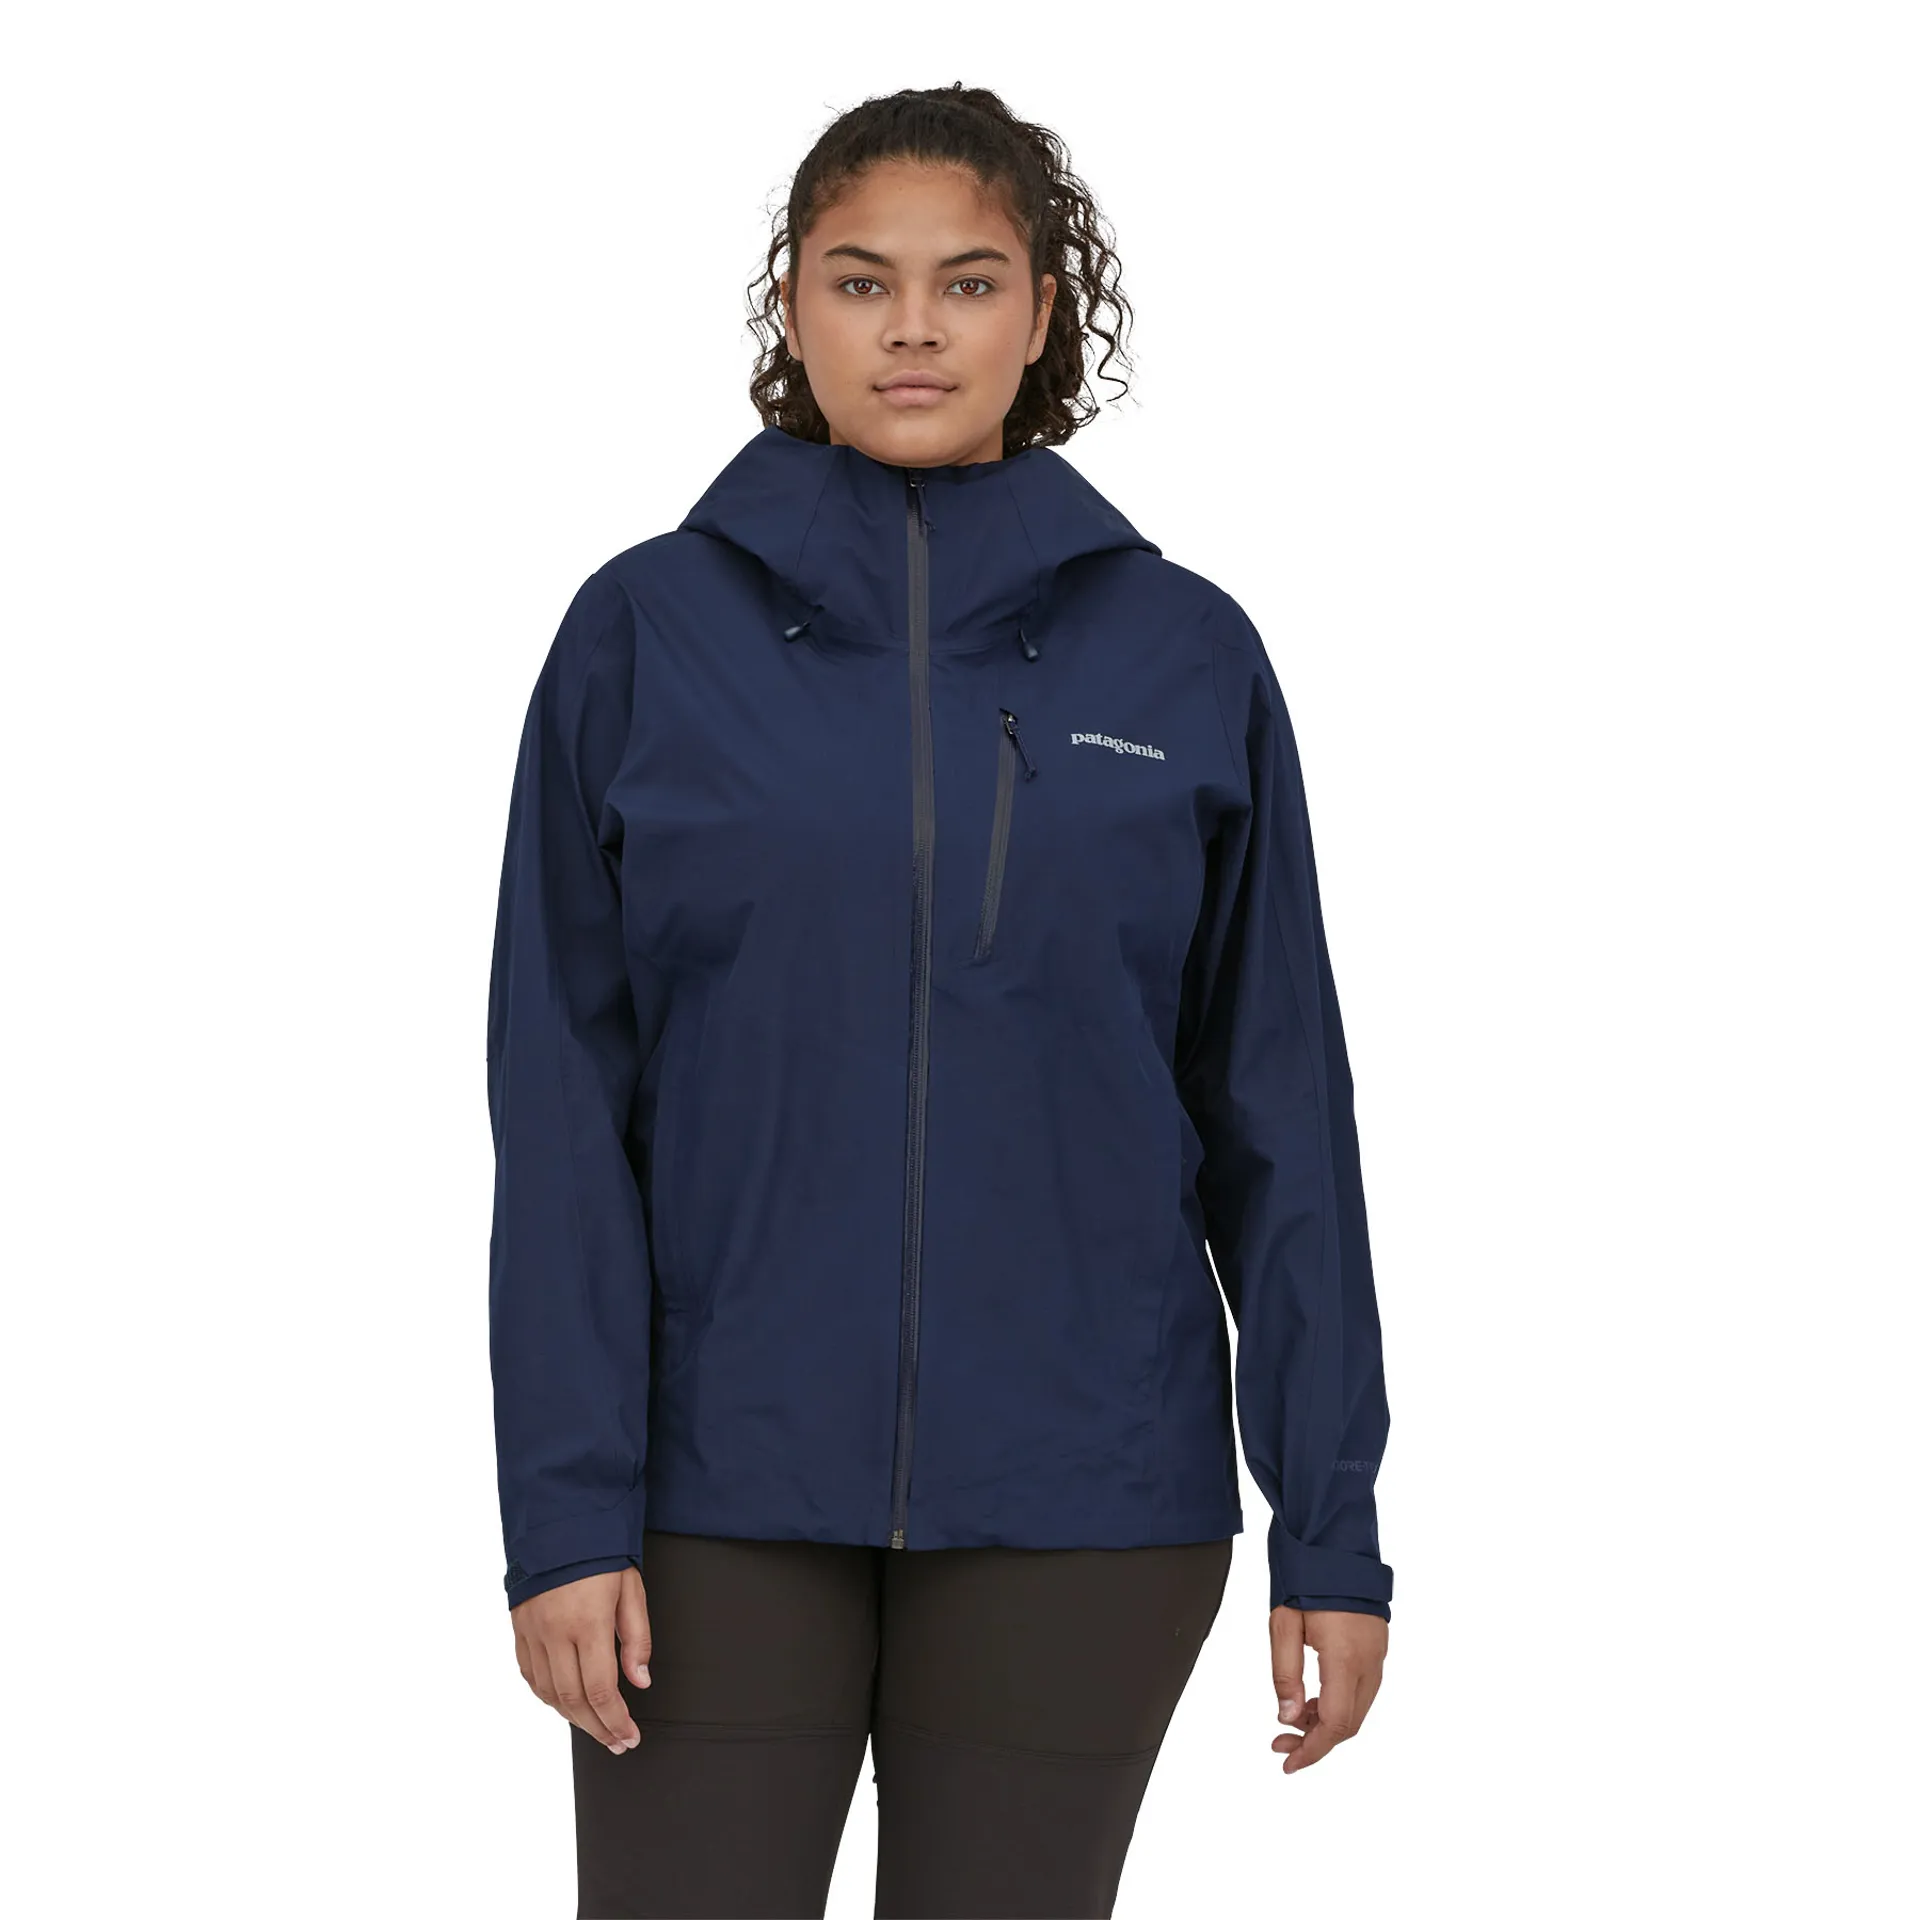 Patagonia Womens Calcite Jacket - Classic Navy